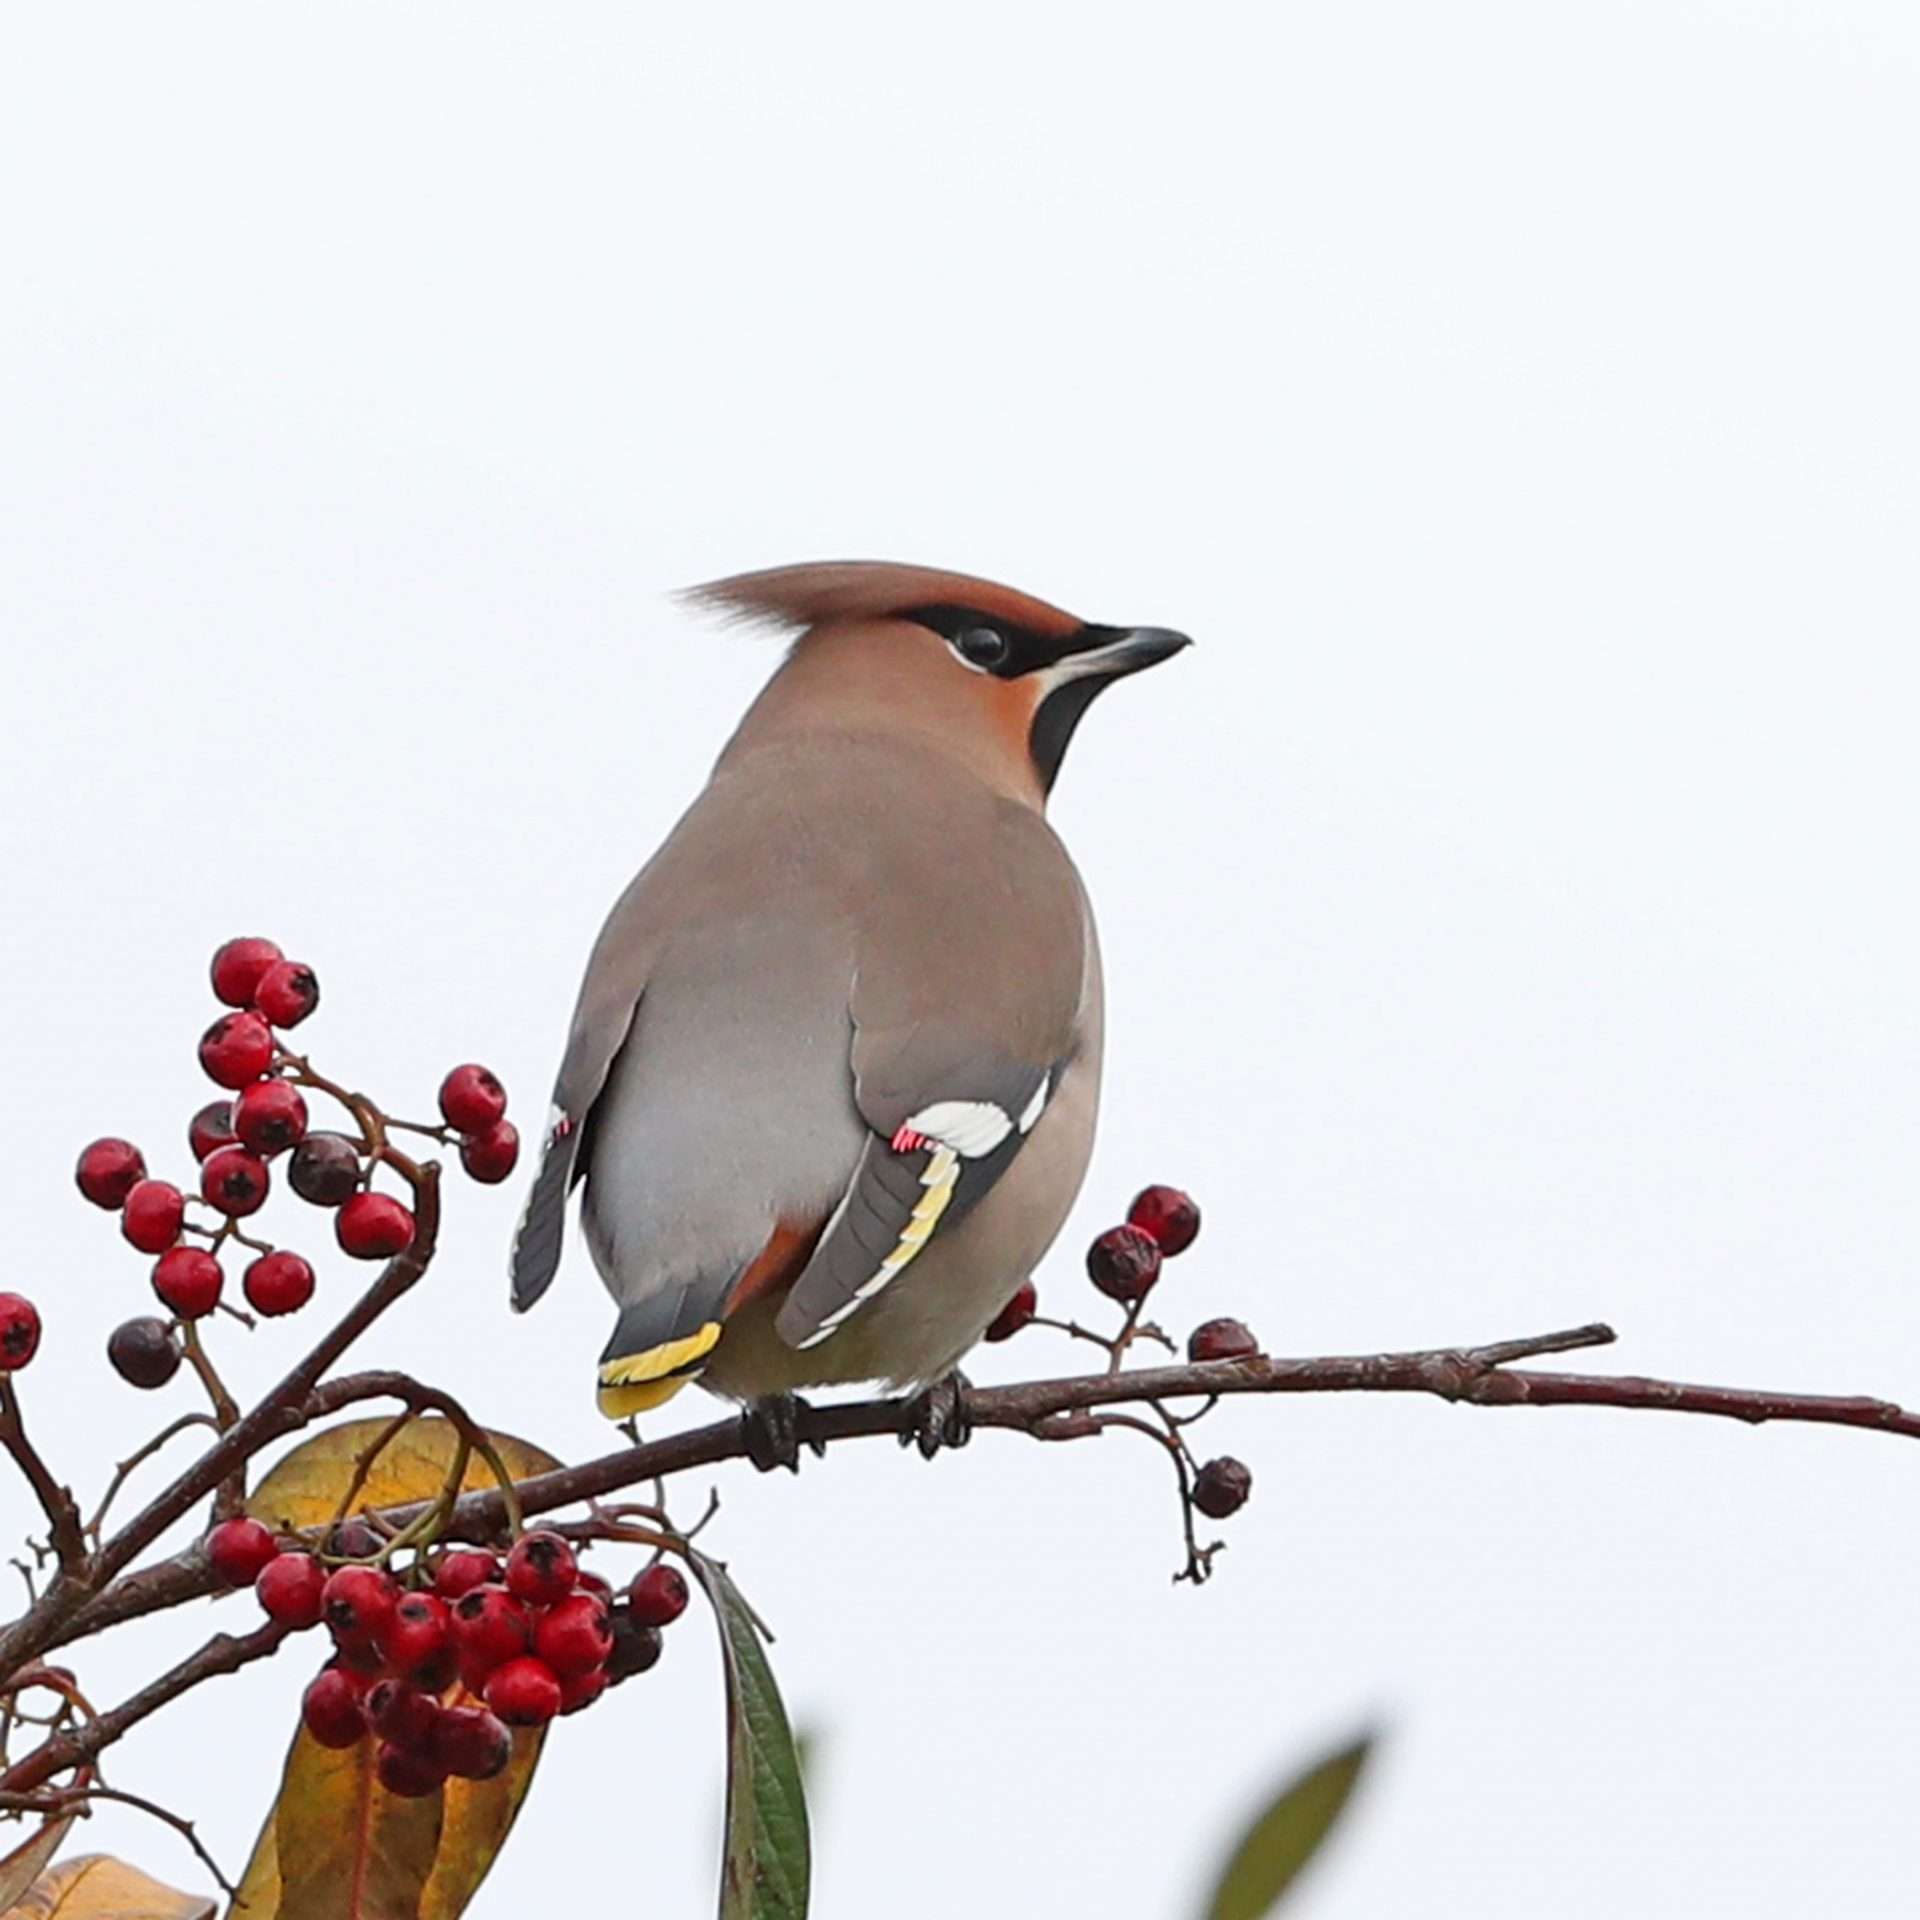 Waxwing by Steve Hopper at Plymouth